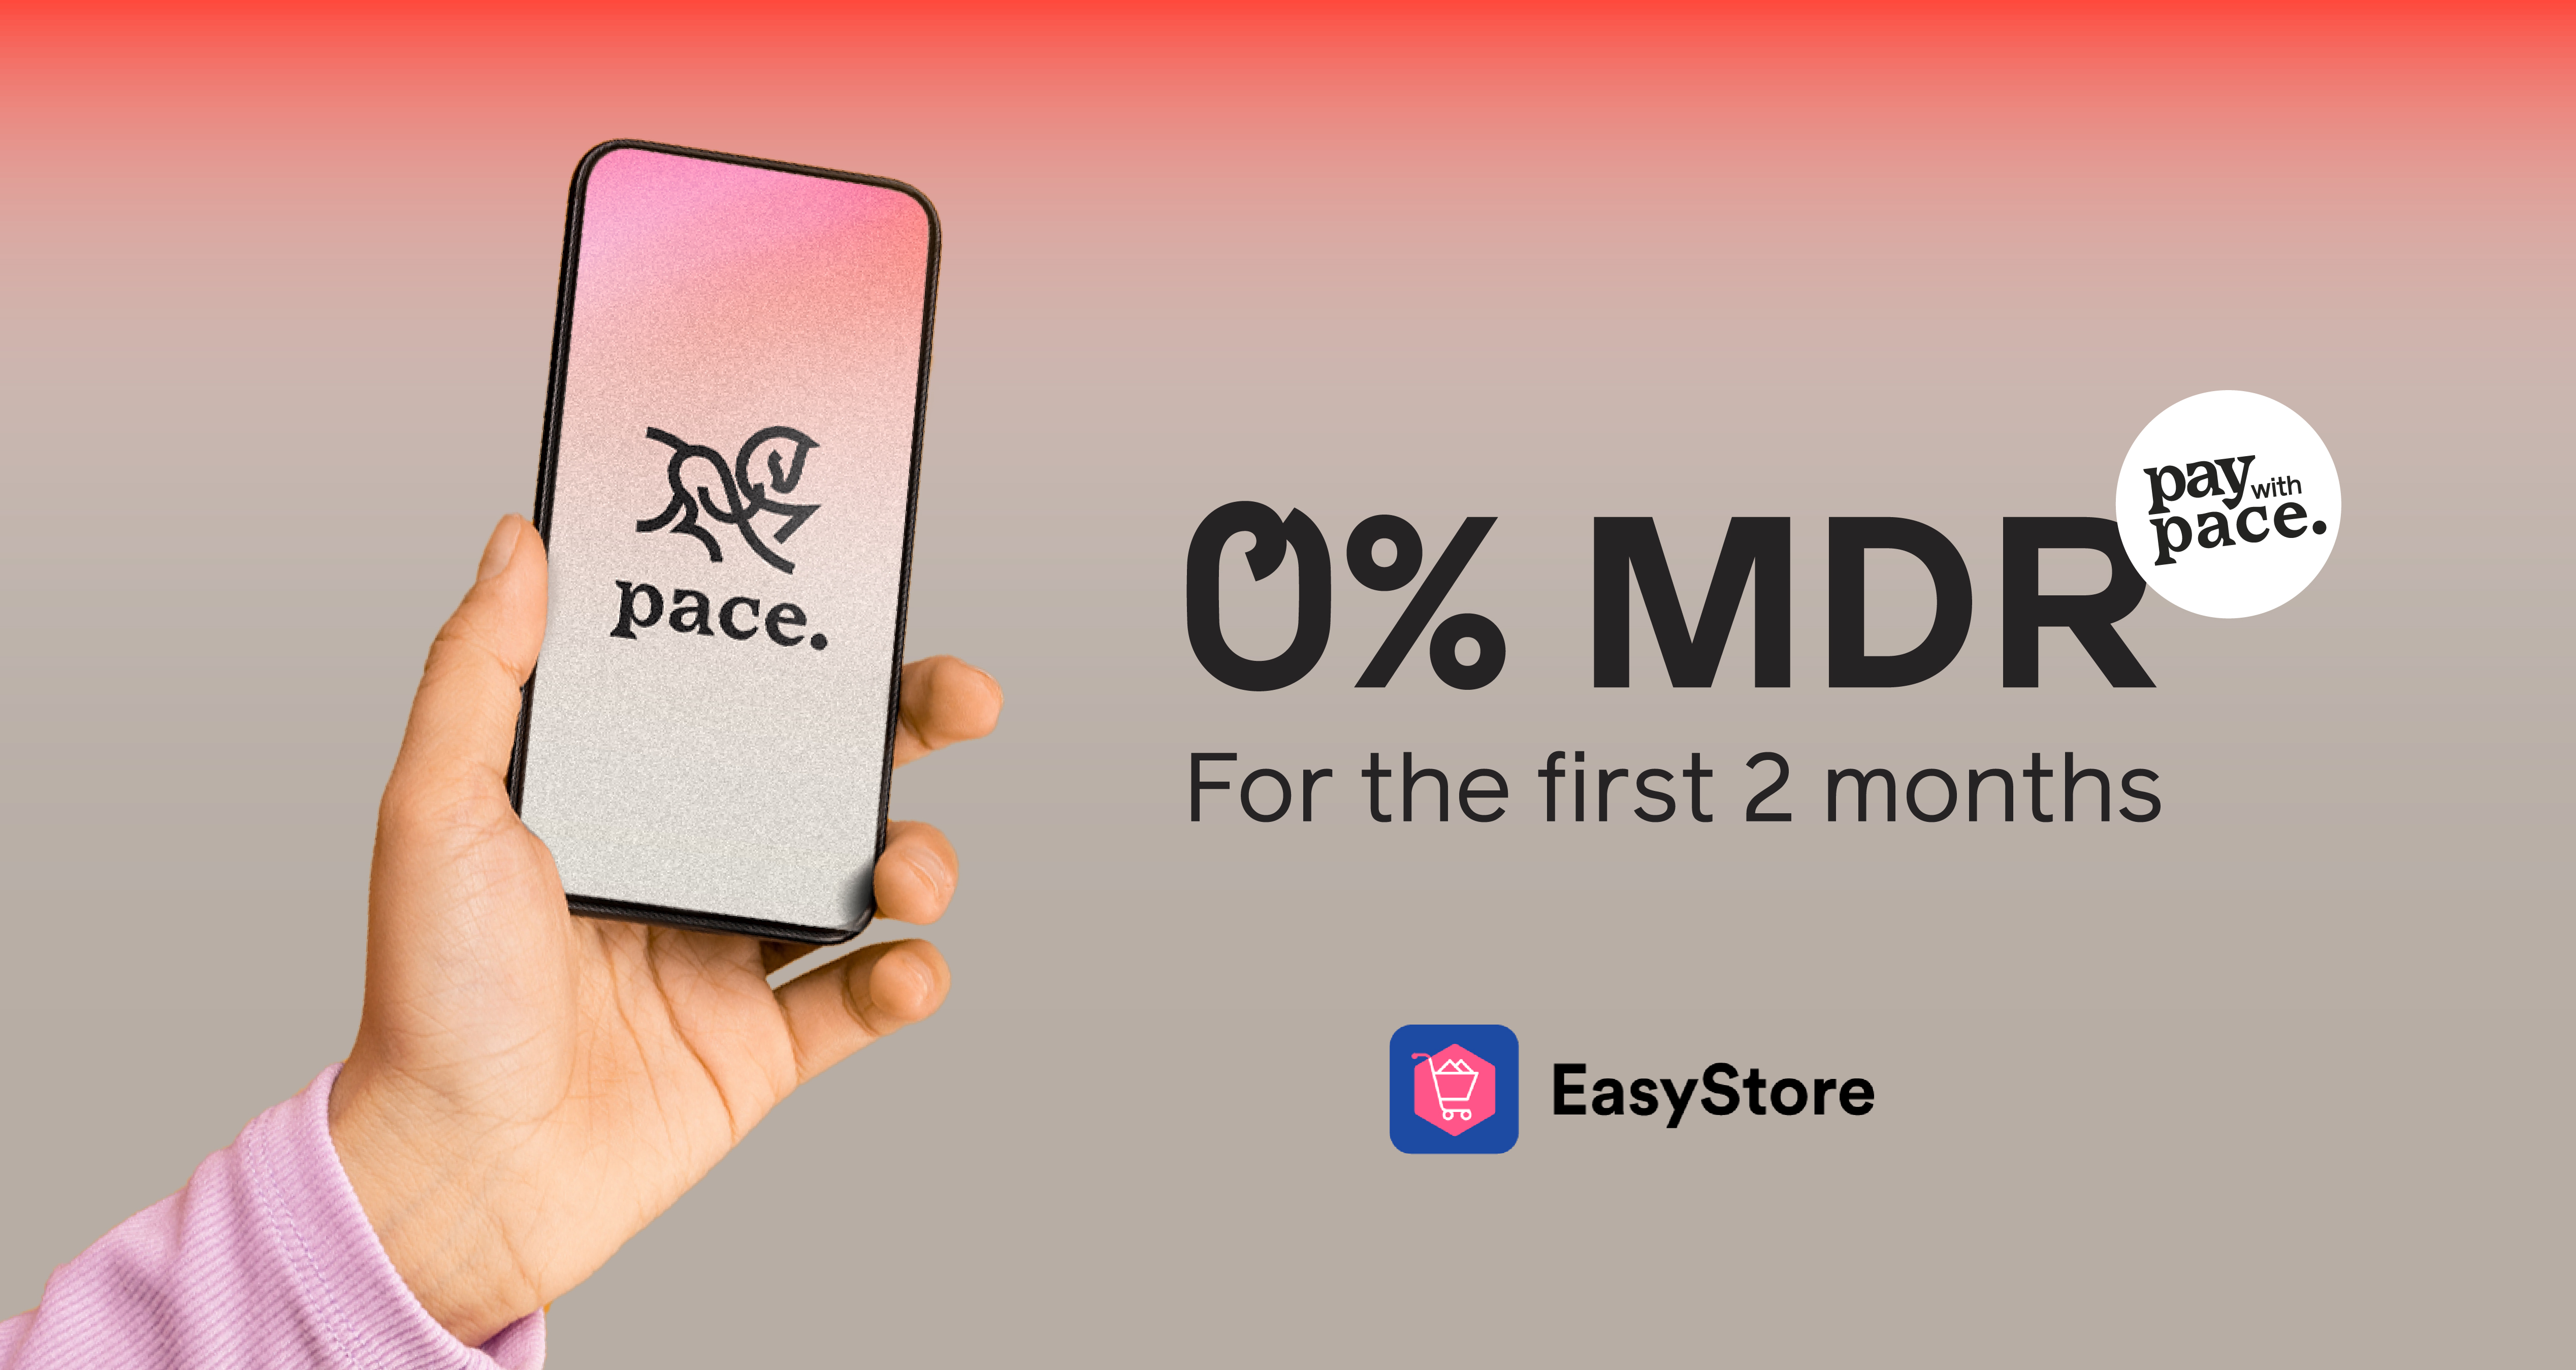 What Is pace. and How They Can Benefit Your Business | EasyStore